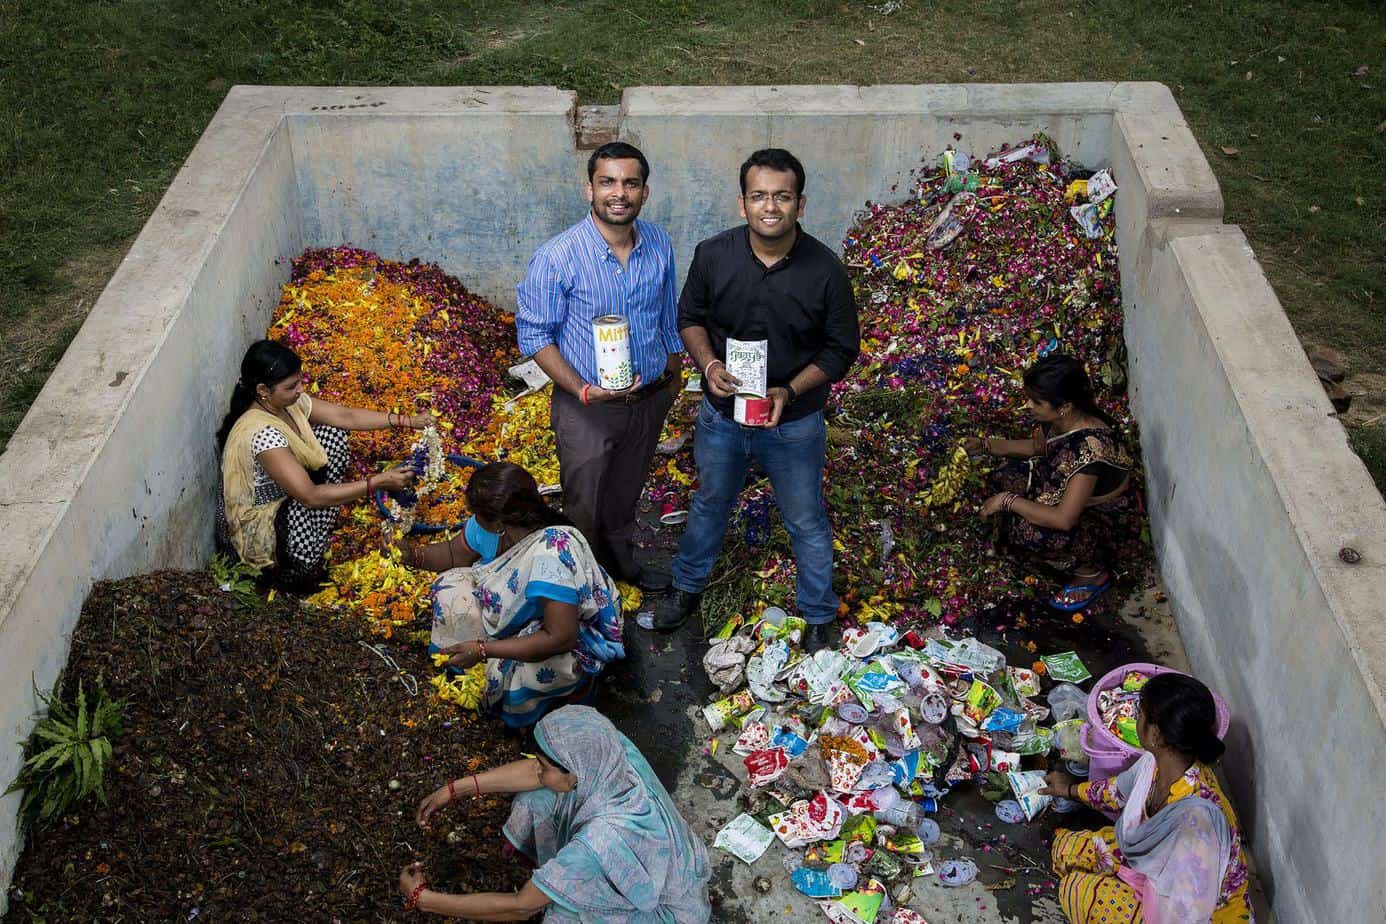 HelpUsGreen – An Innovative Start-up Recycling Religious Floral Waste